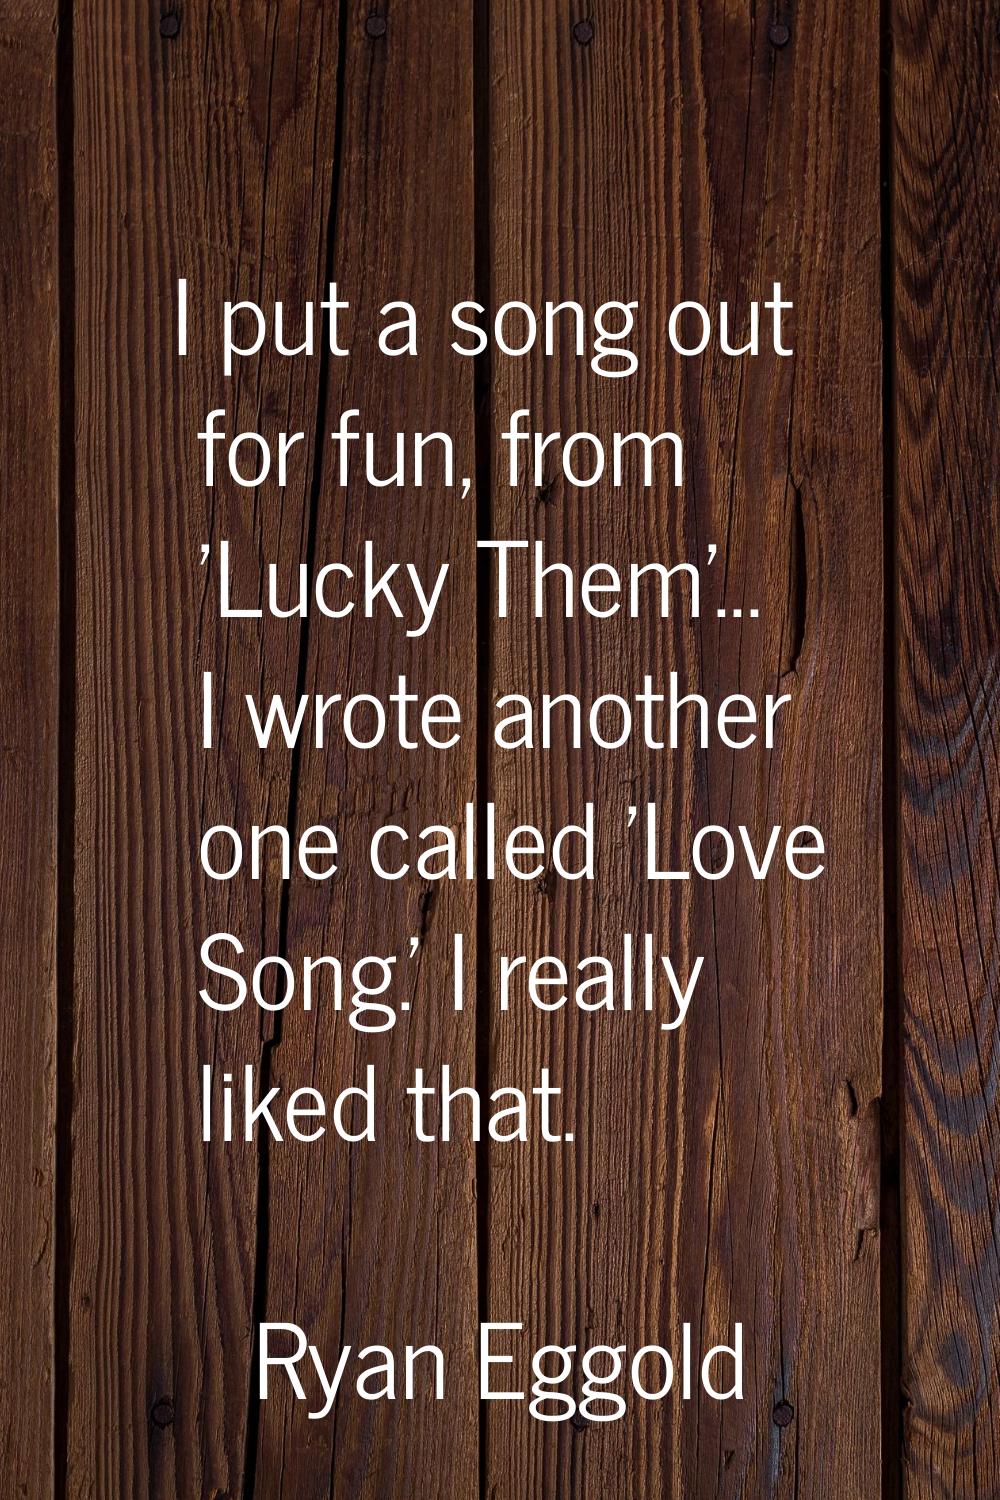 I put a song out for fun, from 'Lucky Them'... I wrote another one called 'Love Song.' I really lik